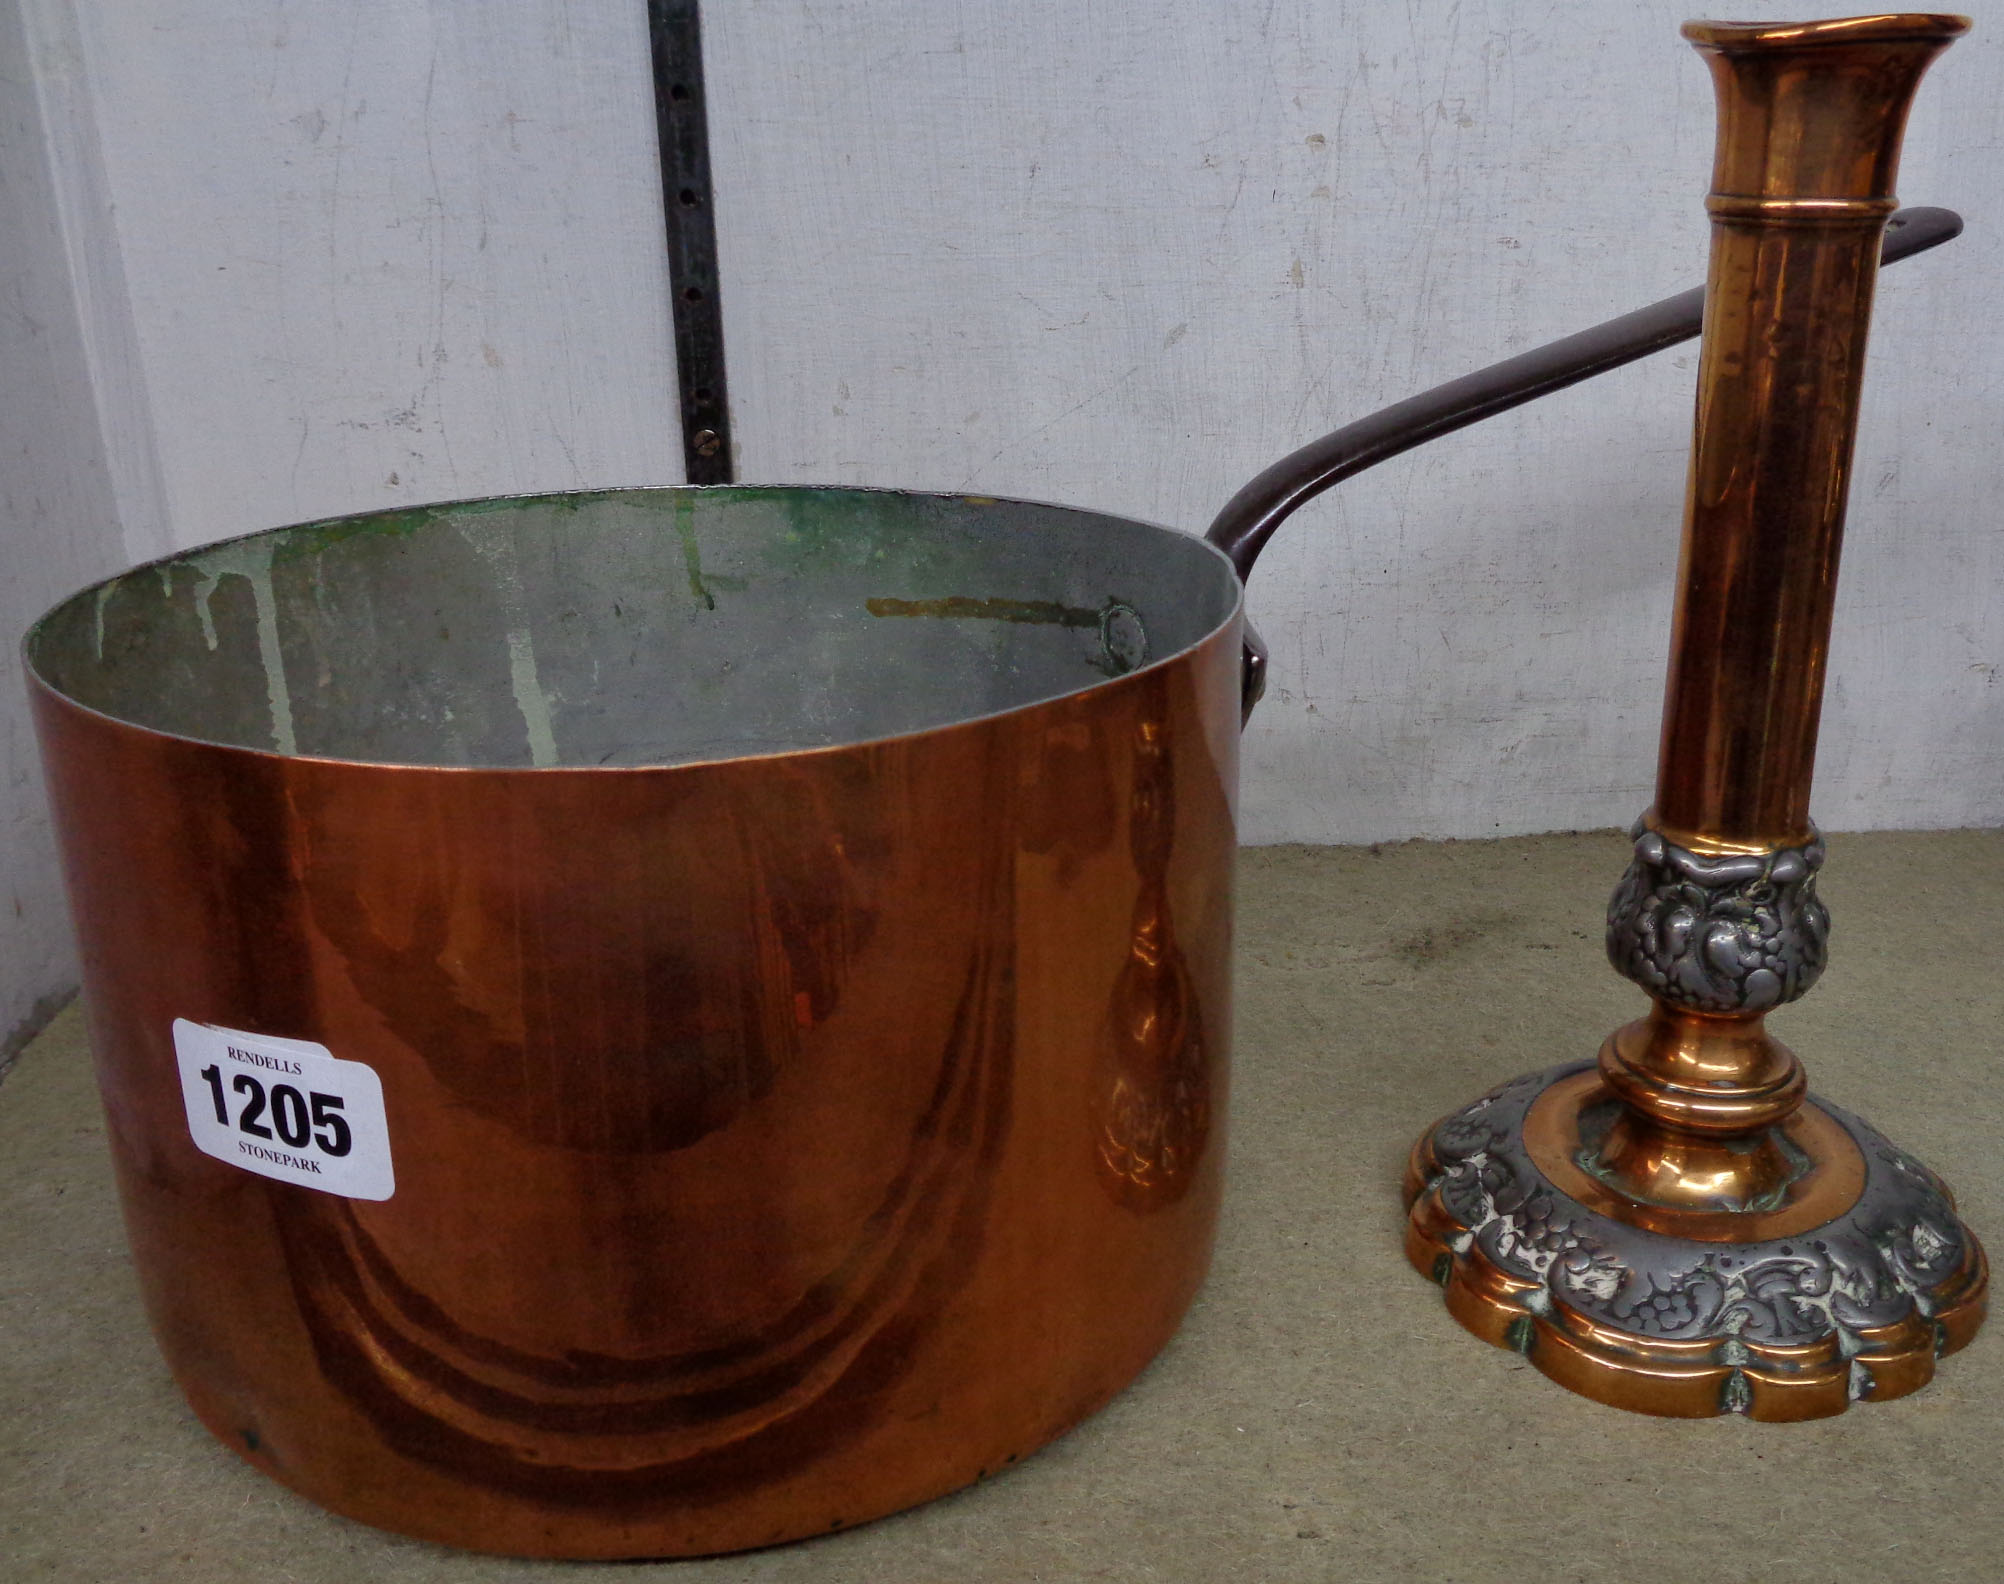 A copper saucepan - sold with a copper and pewter candlestick